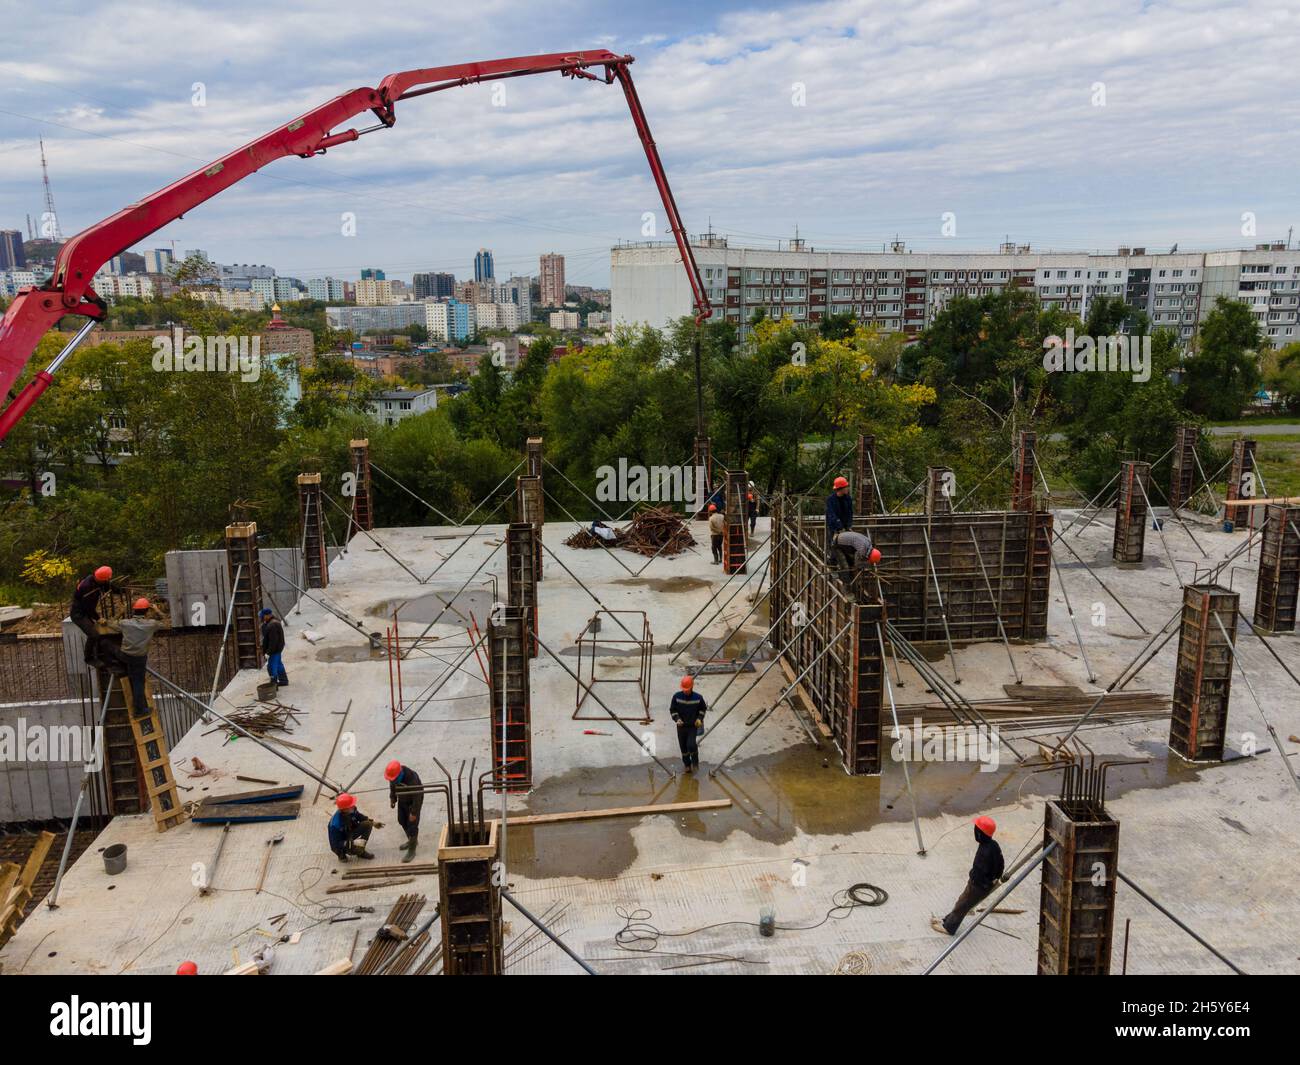 Feeding the working mixture of concrete to the construction site with a concrete pump for pouring the foundation. Stock Photo